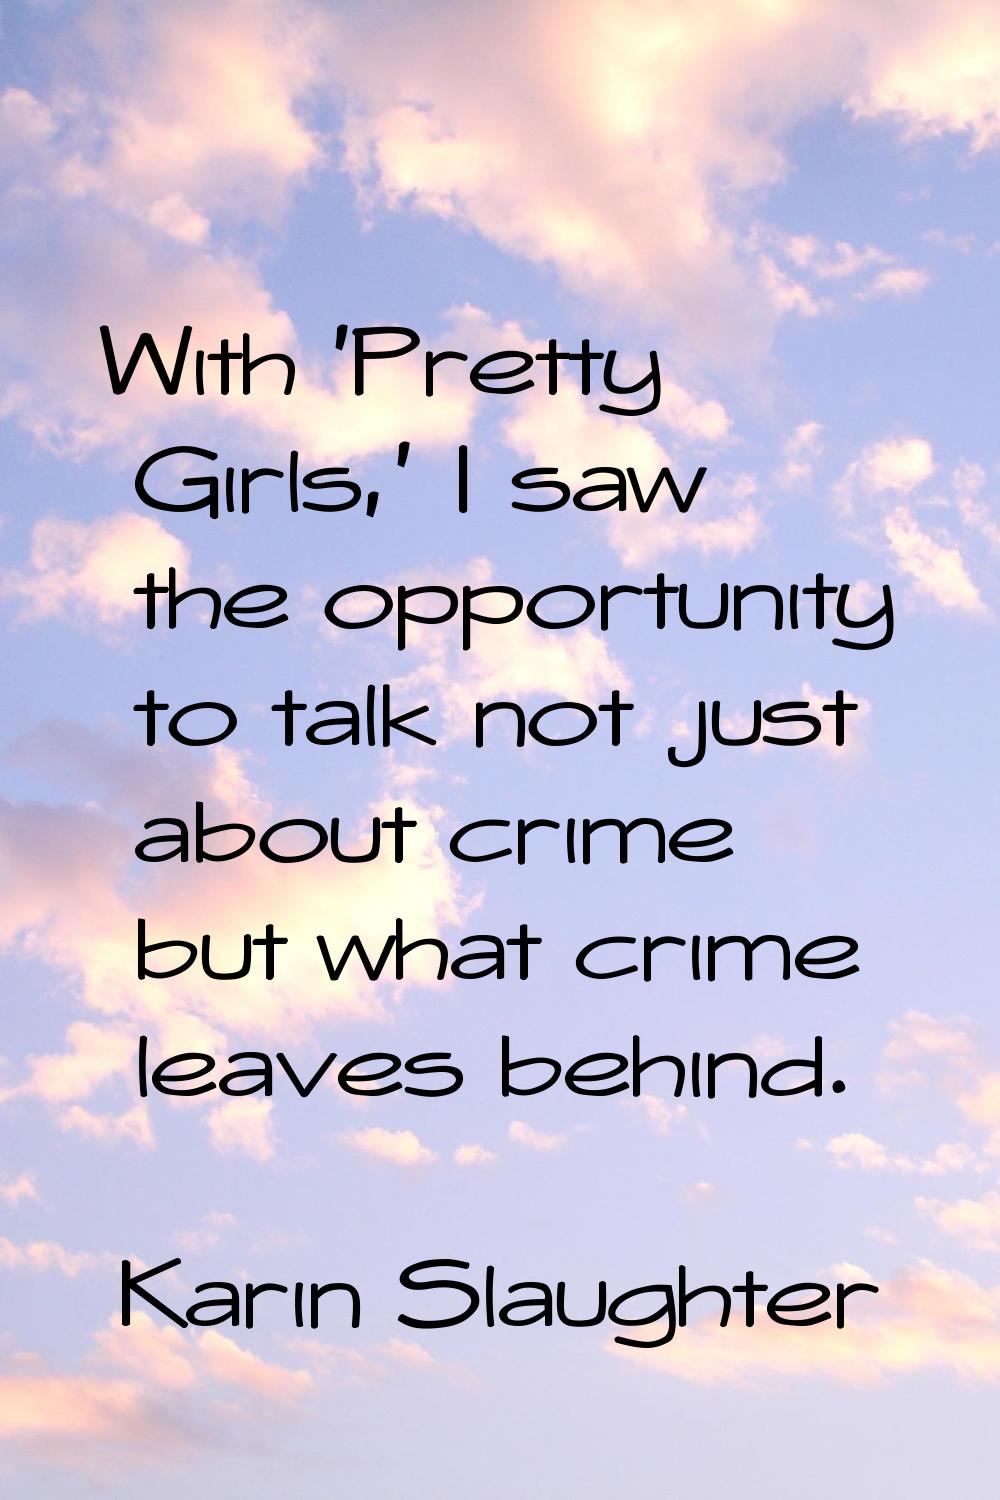 With 'Pretty Girls,' I saw the opportunity to talk not just about crime but what crime leaves behin